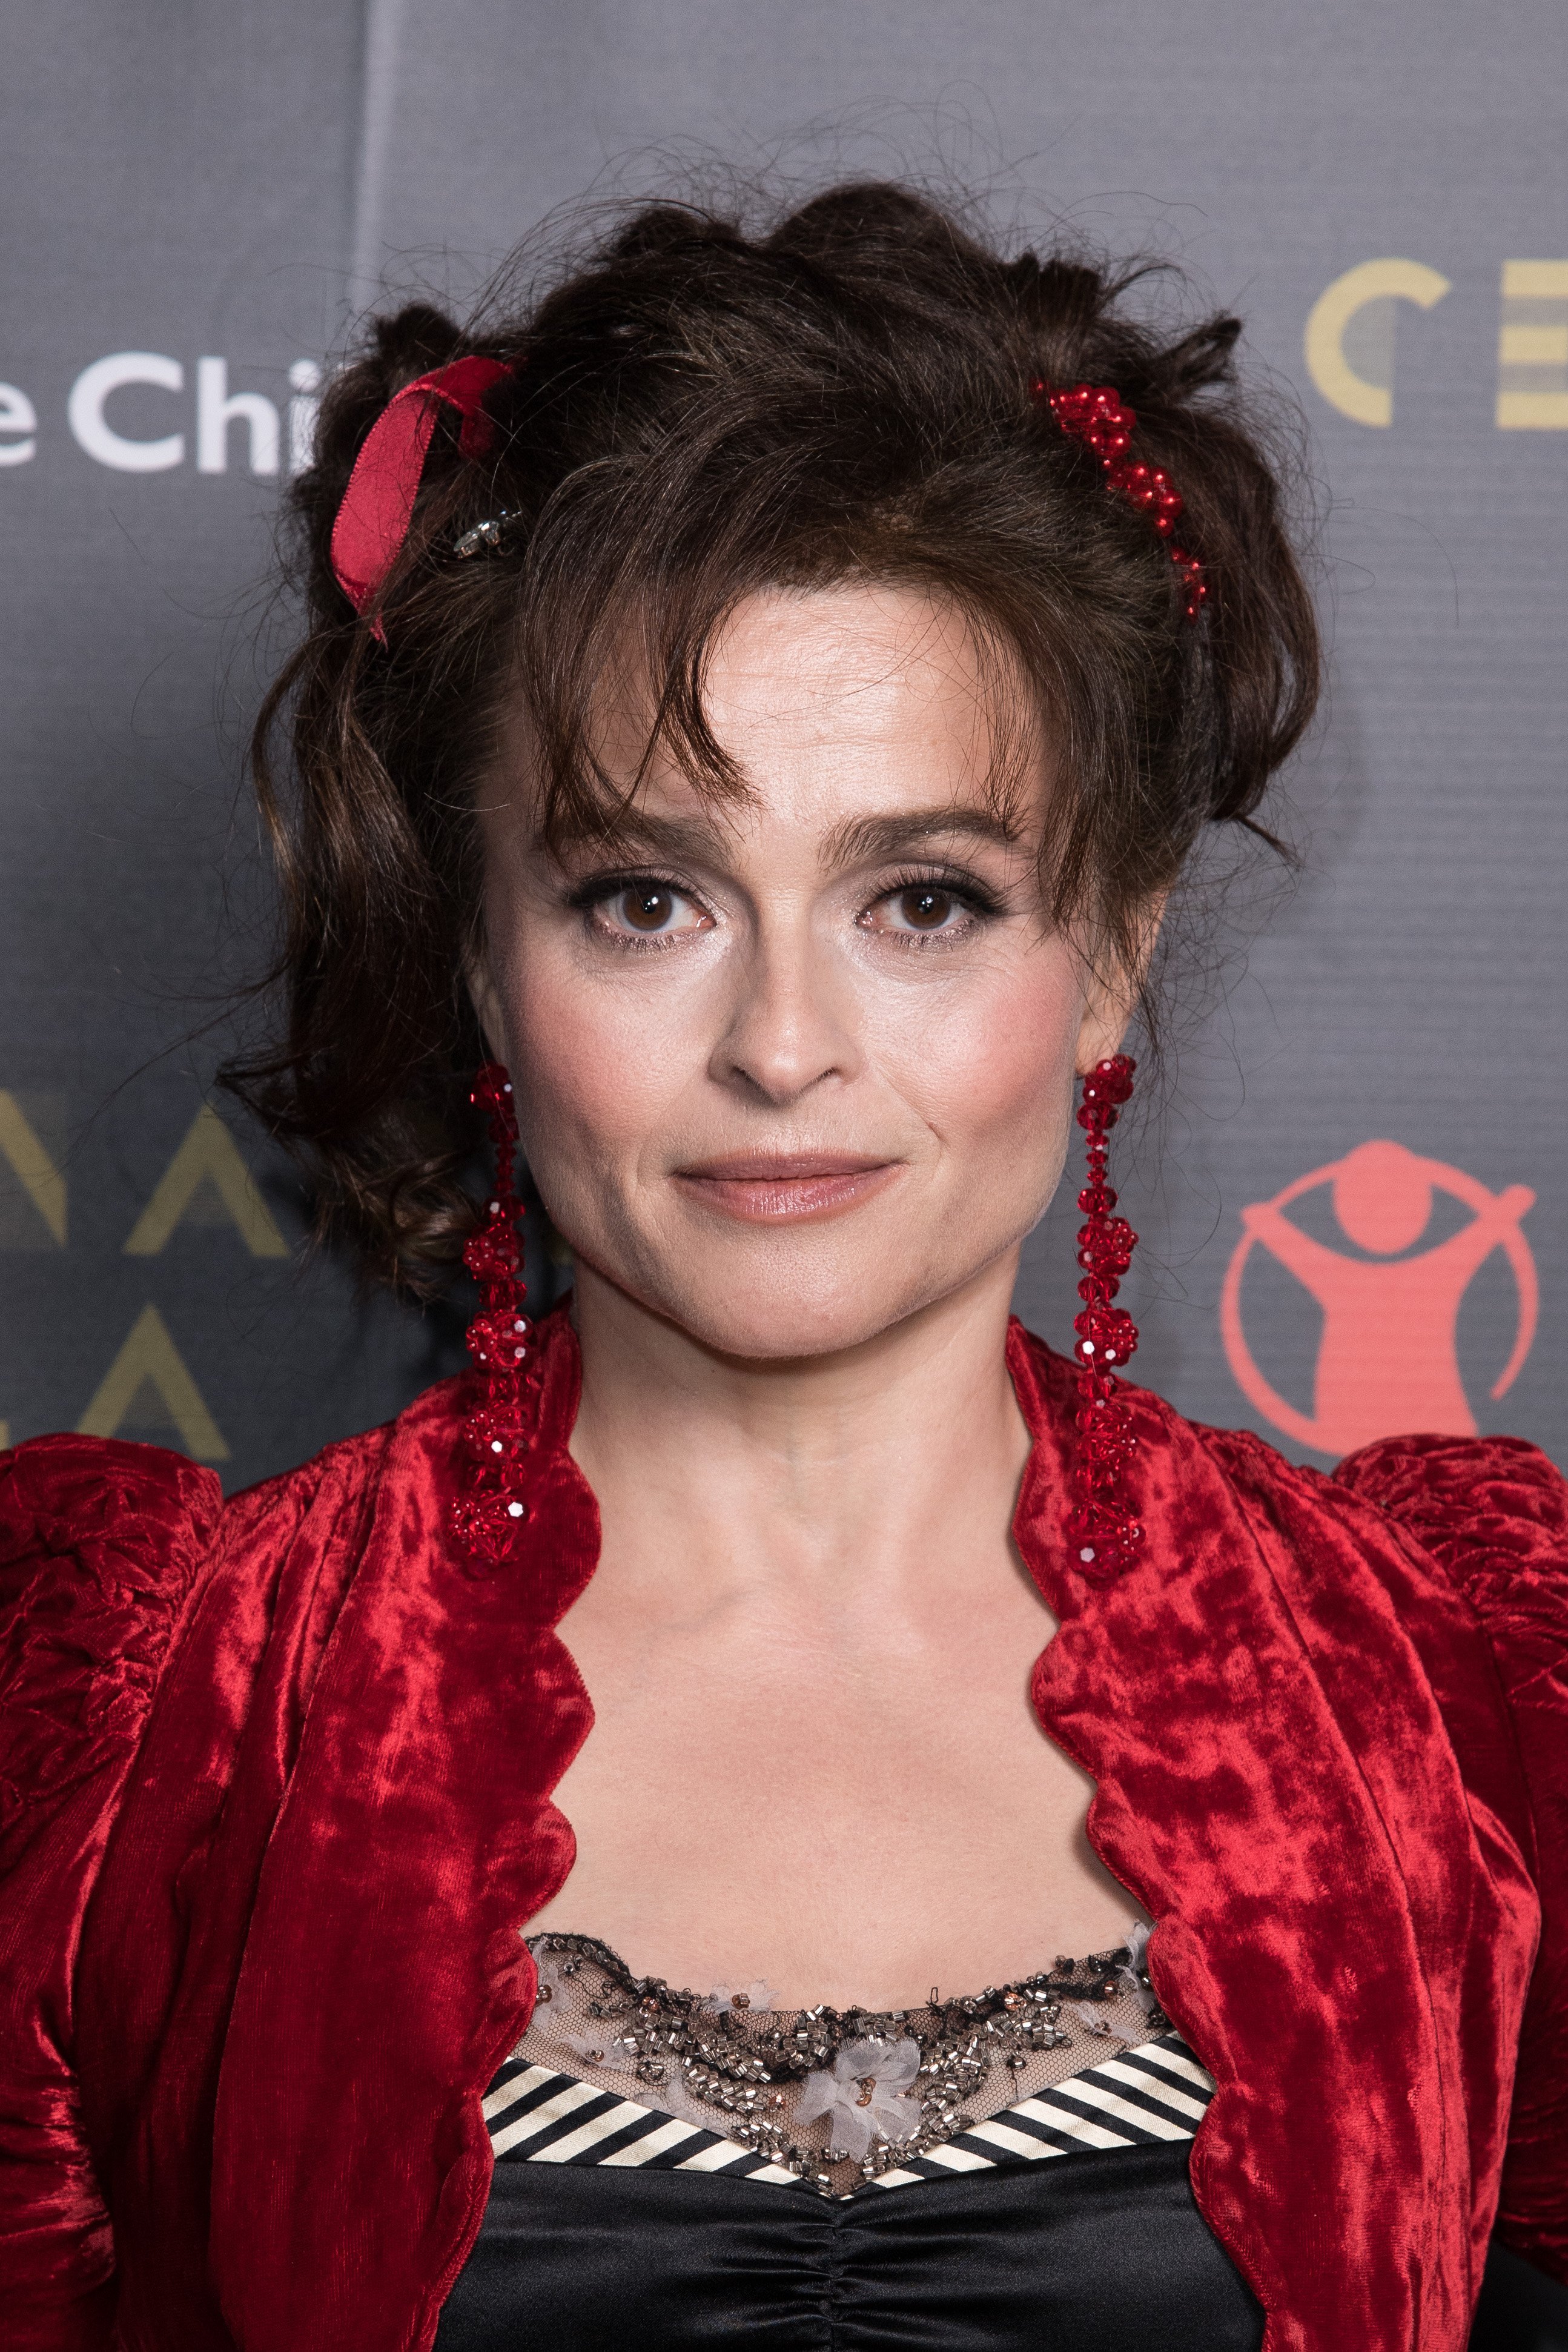 Helena Bonham Carter attends the Save the Children: Centenary Gala in London, England on May 9, 2019 | Photo: Getty Images